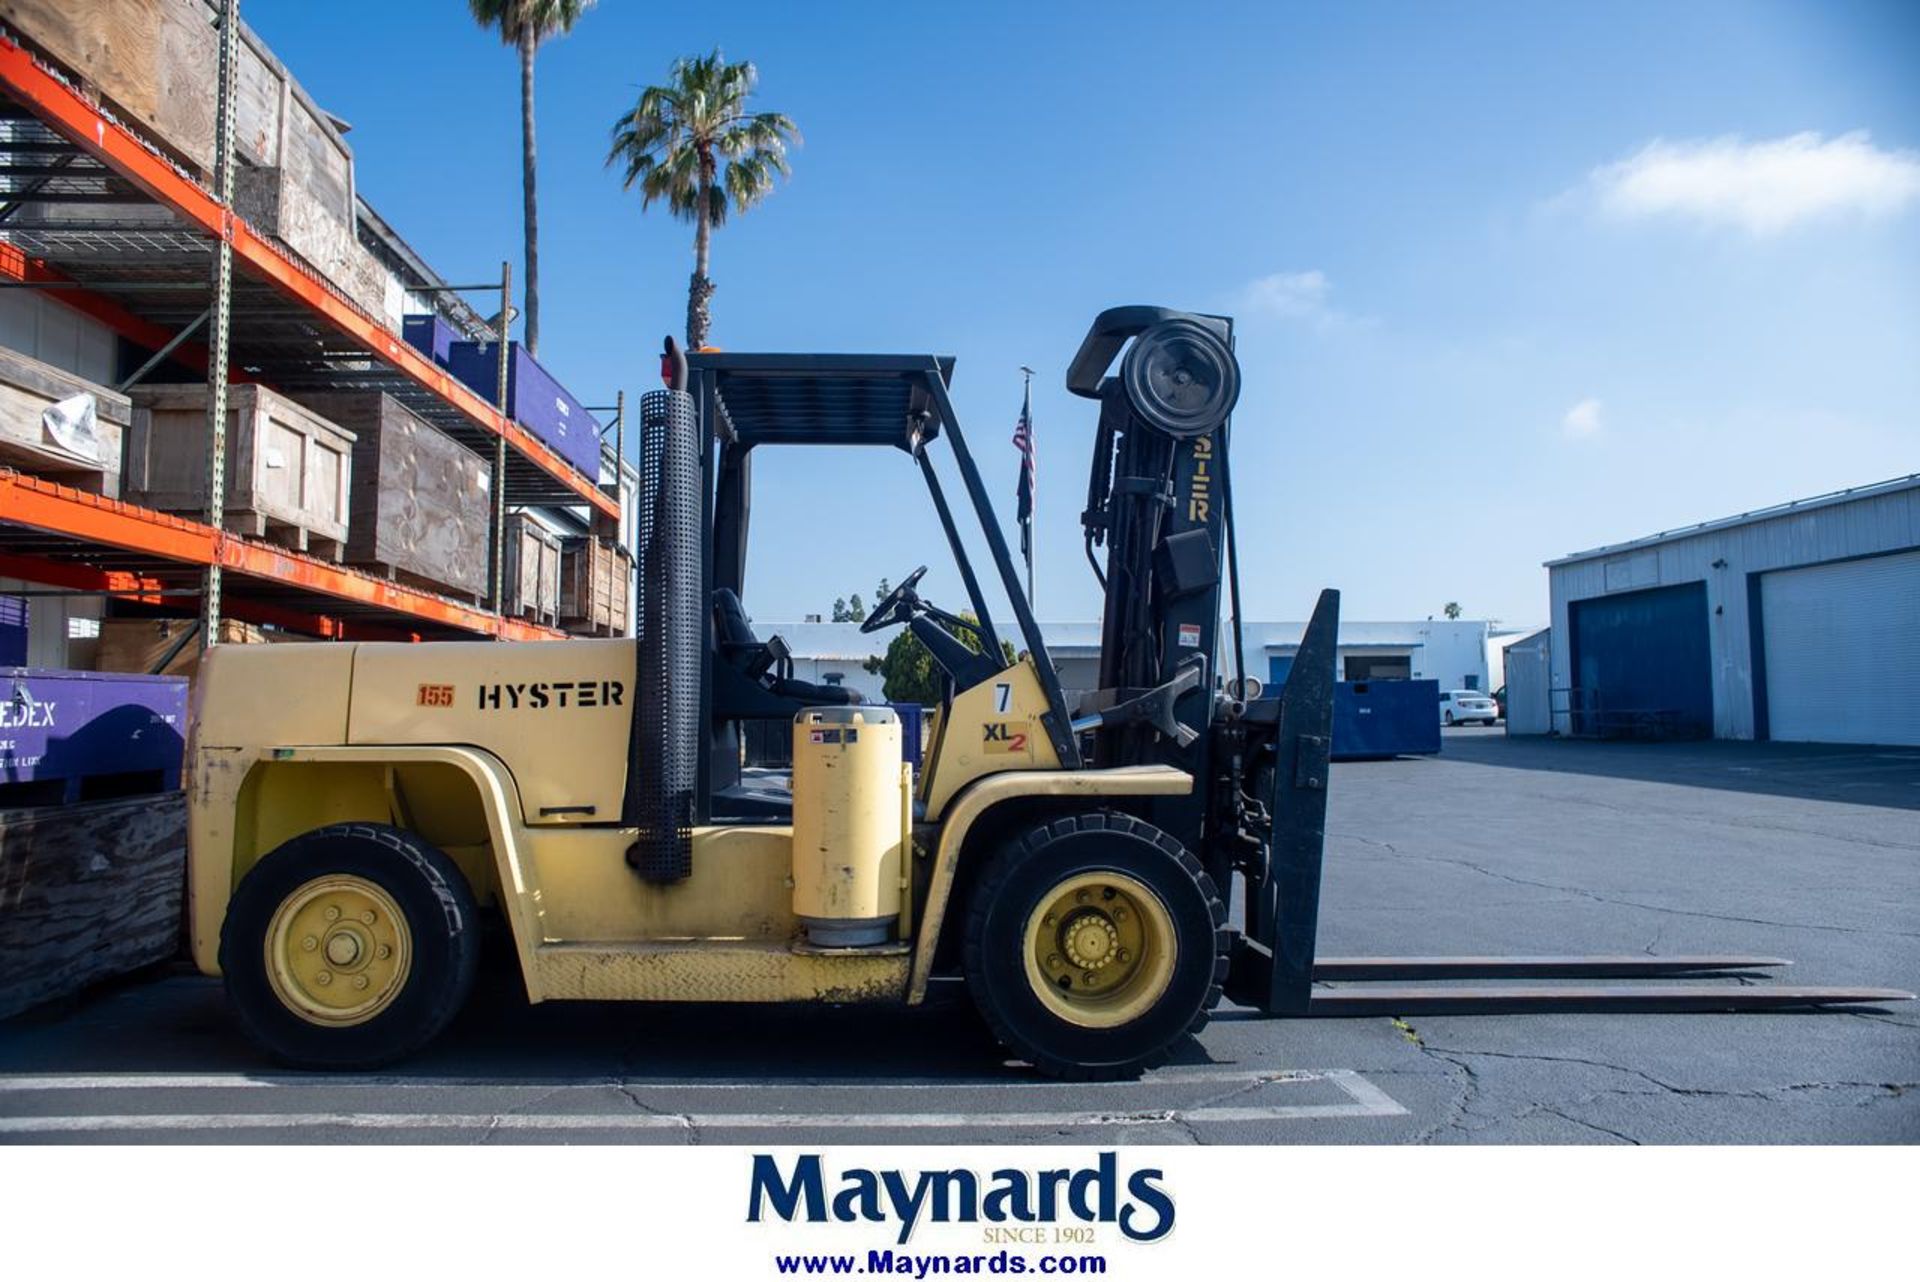 Hyster H155XL 14,700 Lb. Cap. Propane Forklift - Image 6 of 23